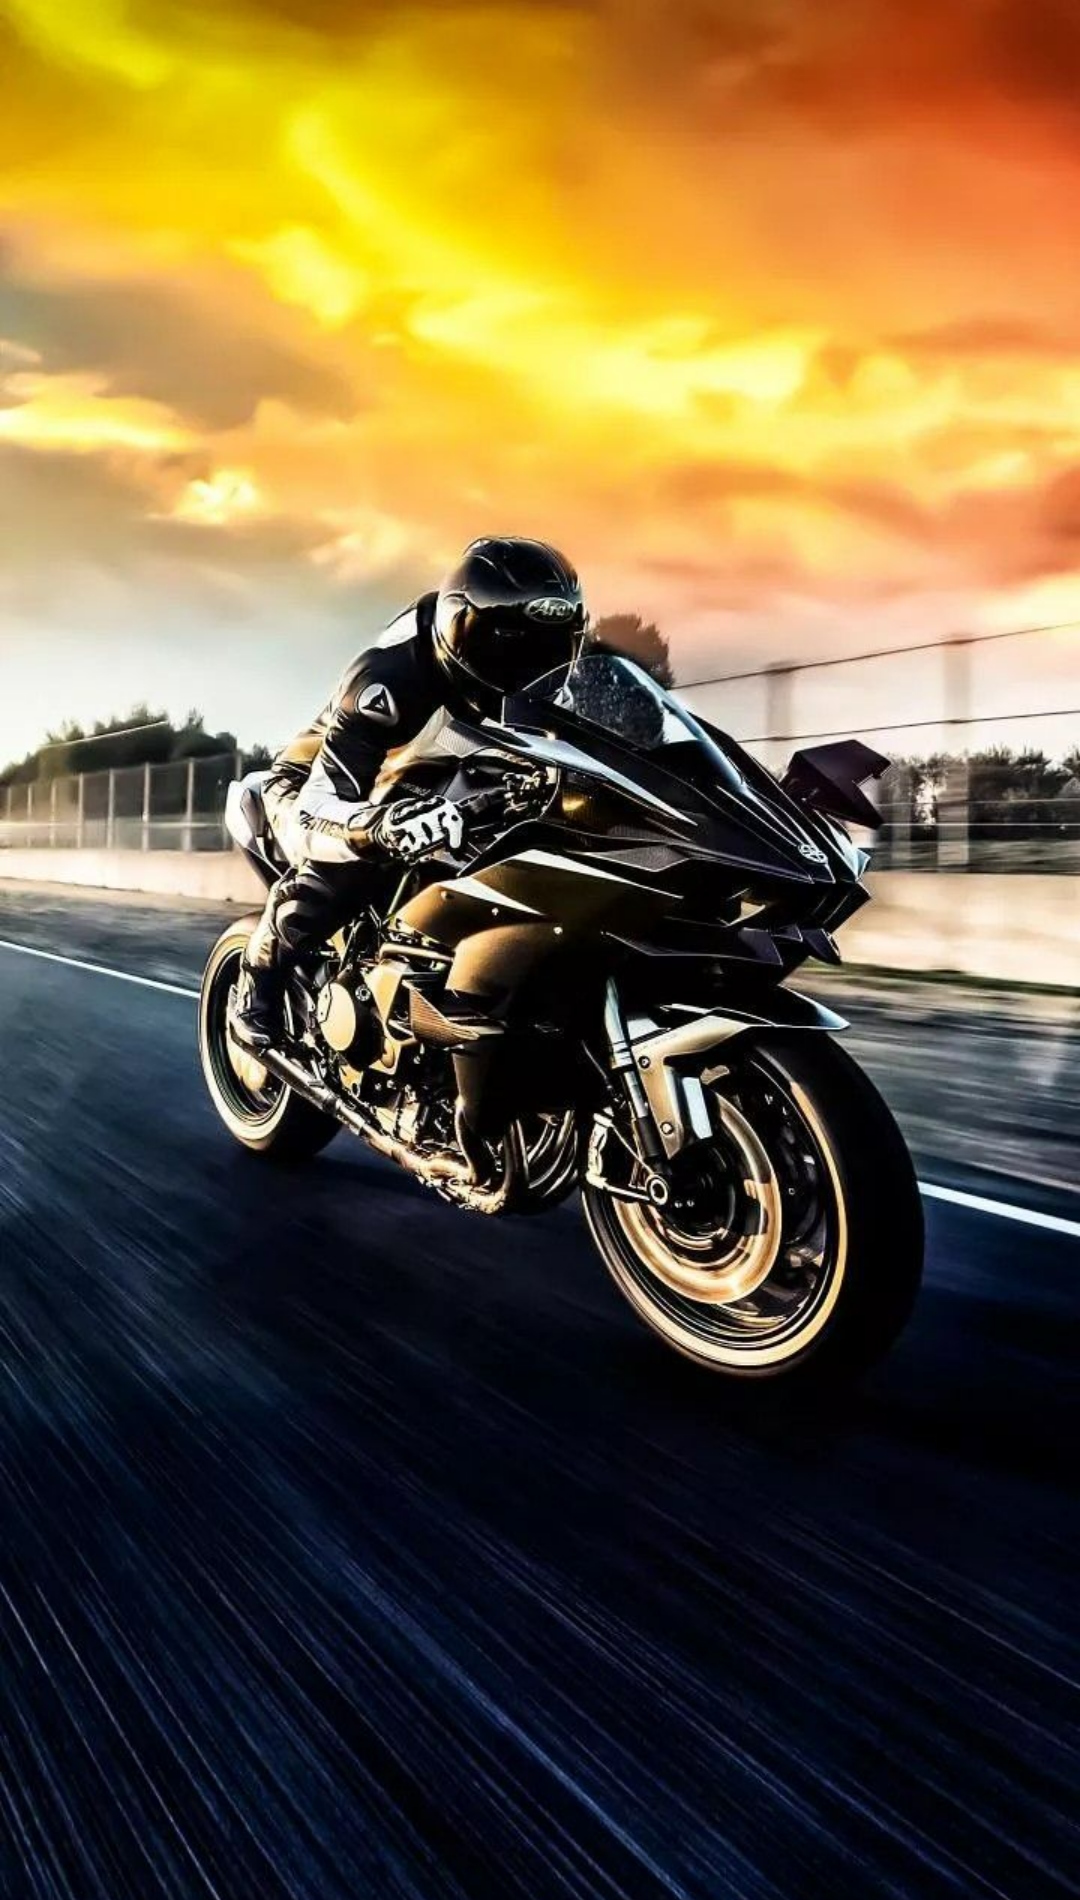 Cool Ninja h2r Pictures